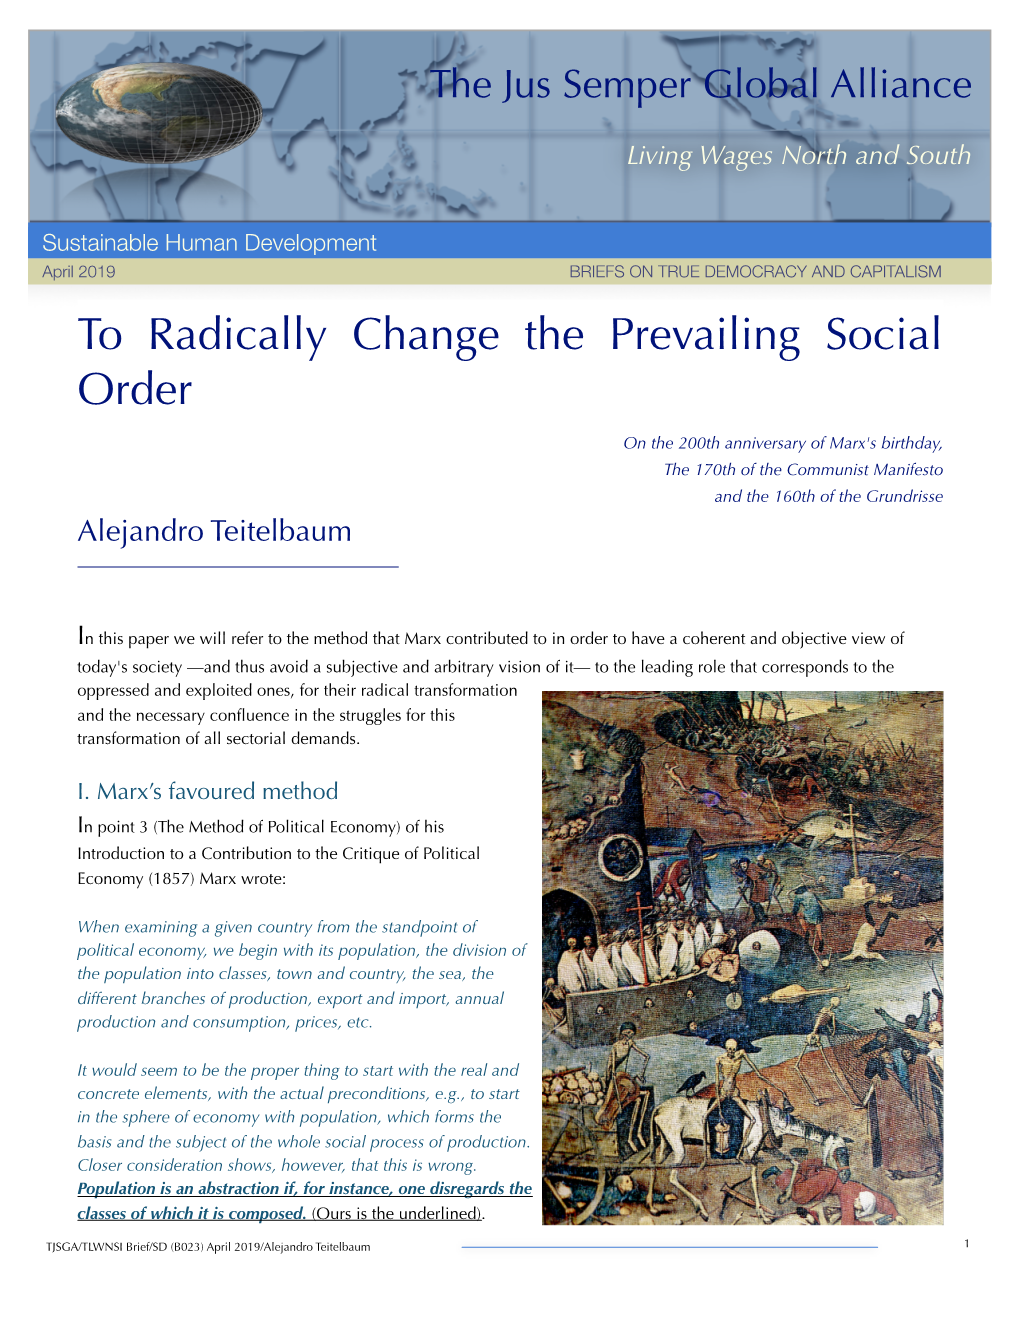 To Radically Change the Prevailing Social Order